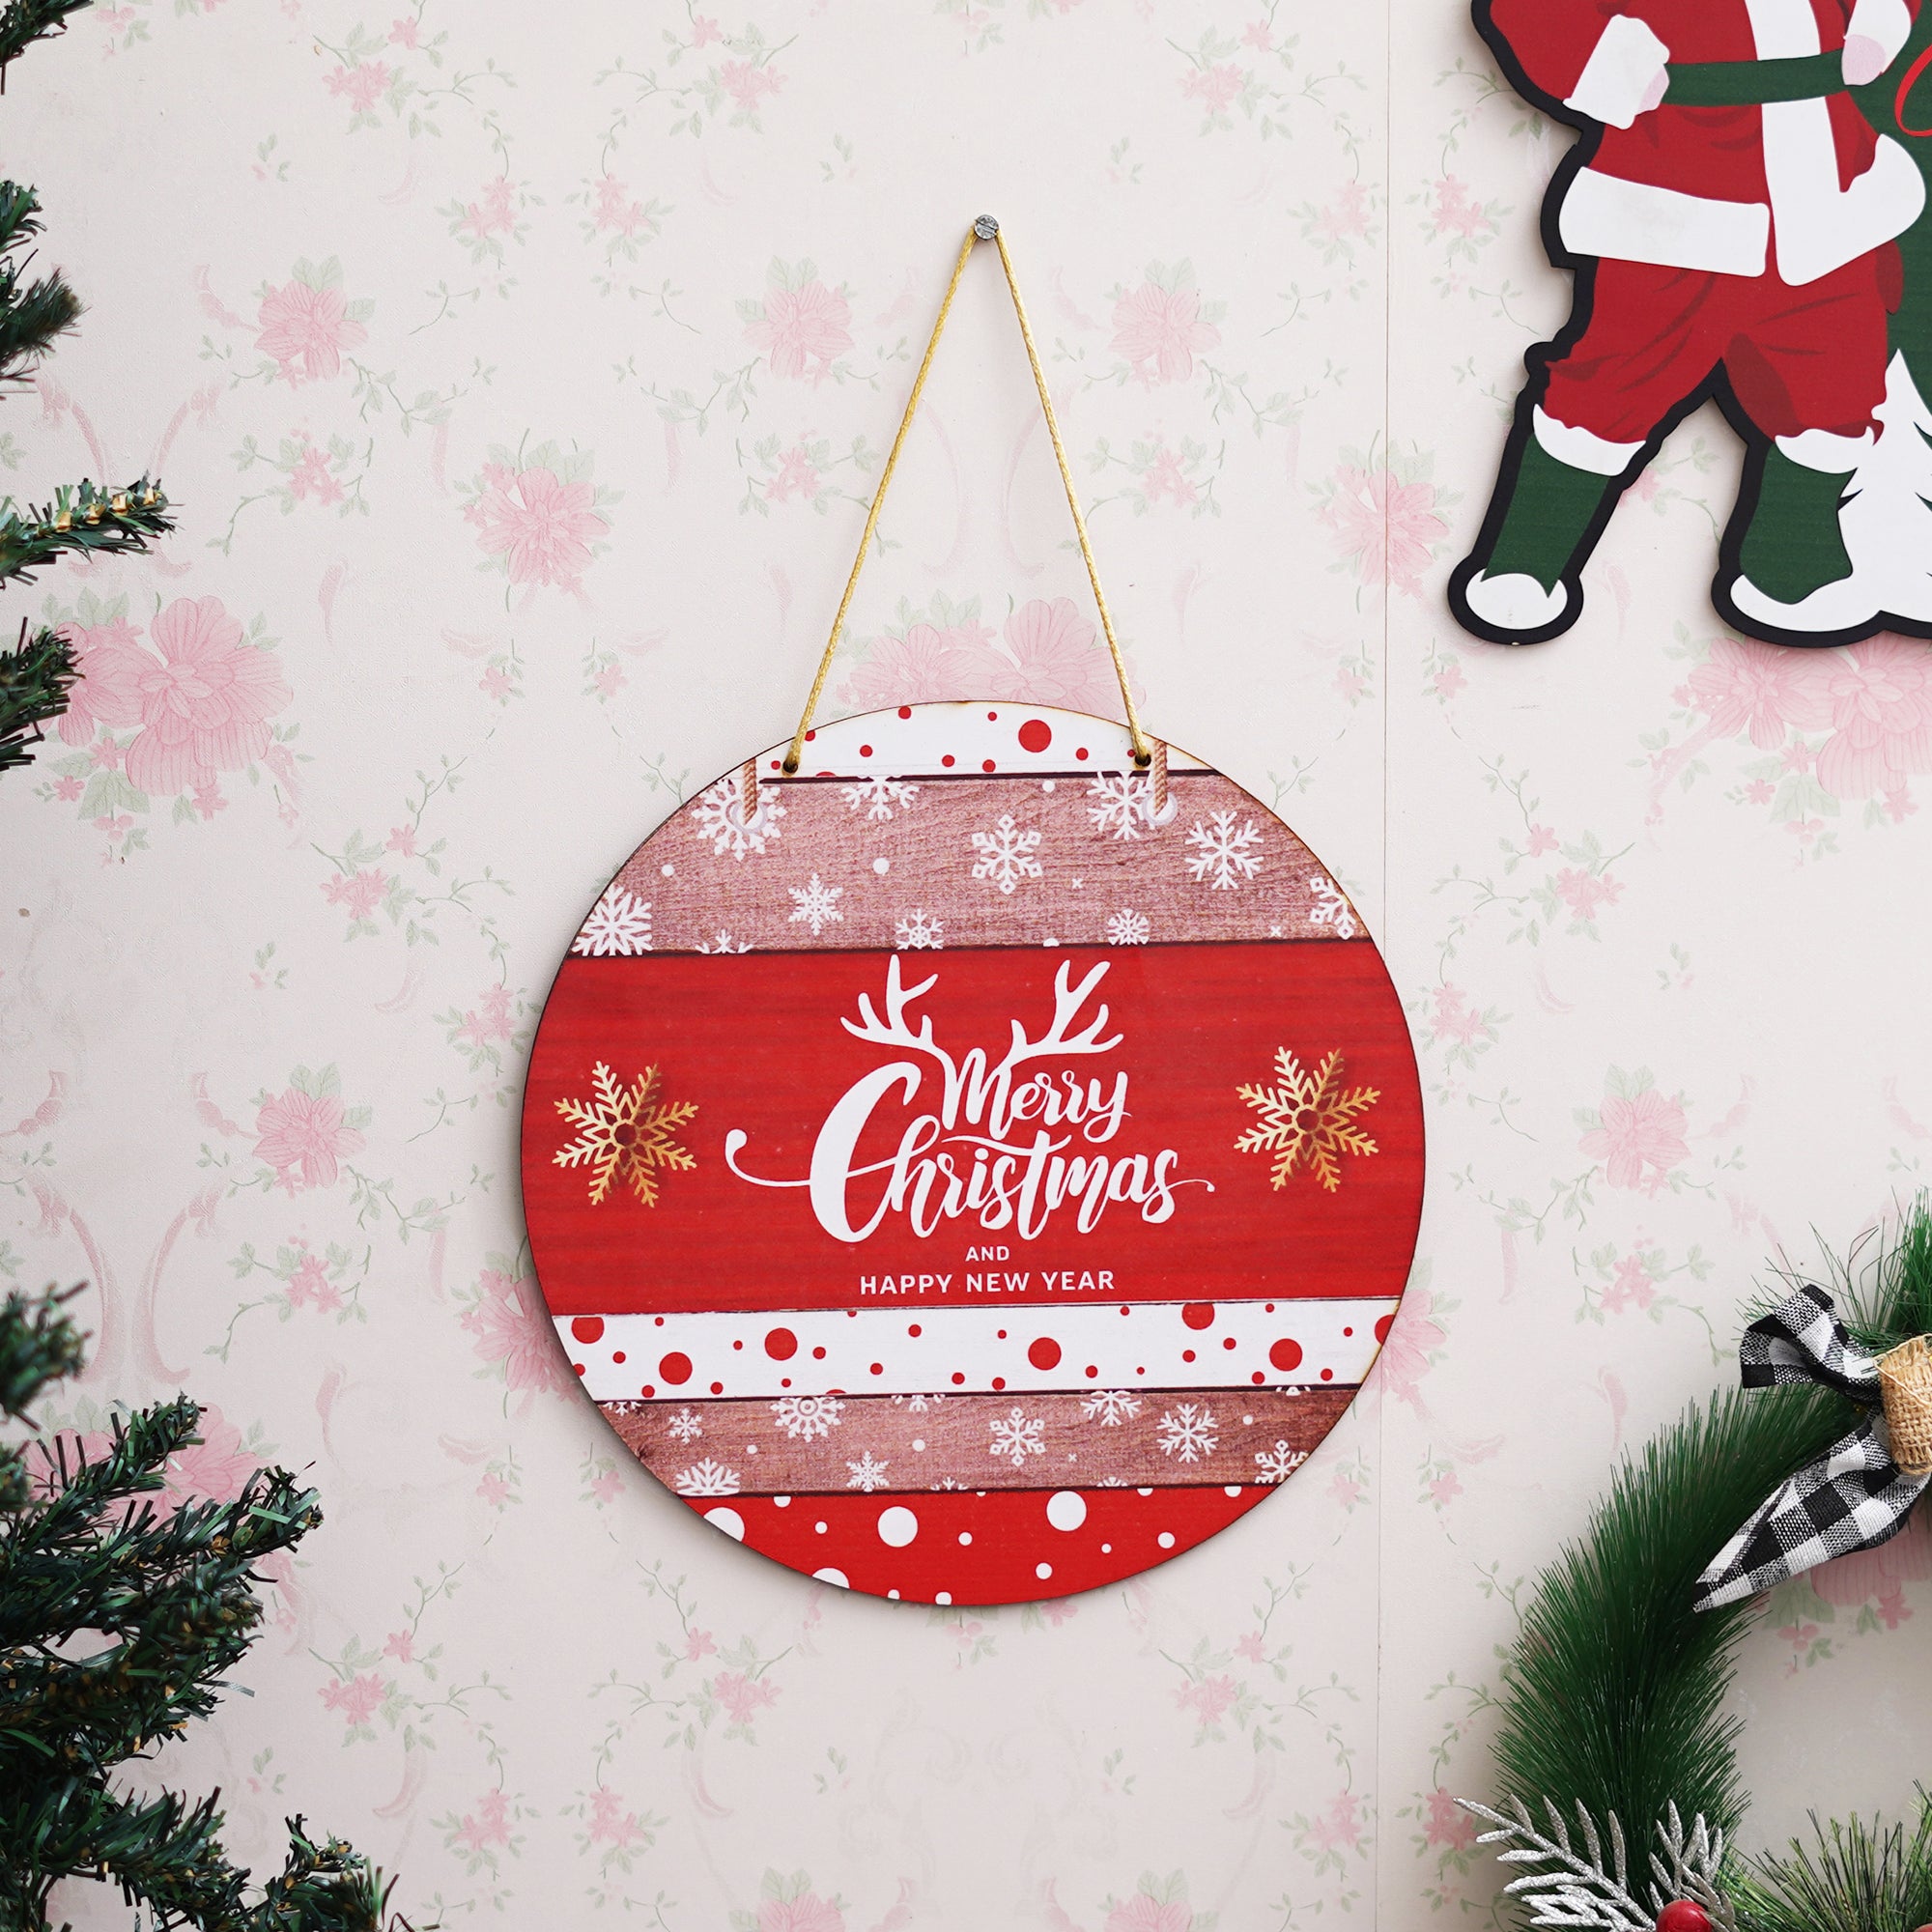 eCraftIndia "Merry Christmas and Happy New Year" Printed Wooden Door Wall Hanging for Home and Christmas Tree Decorations (Red, White, Golden)